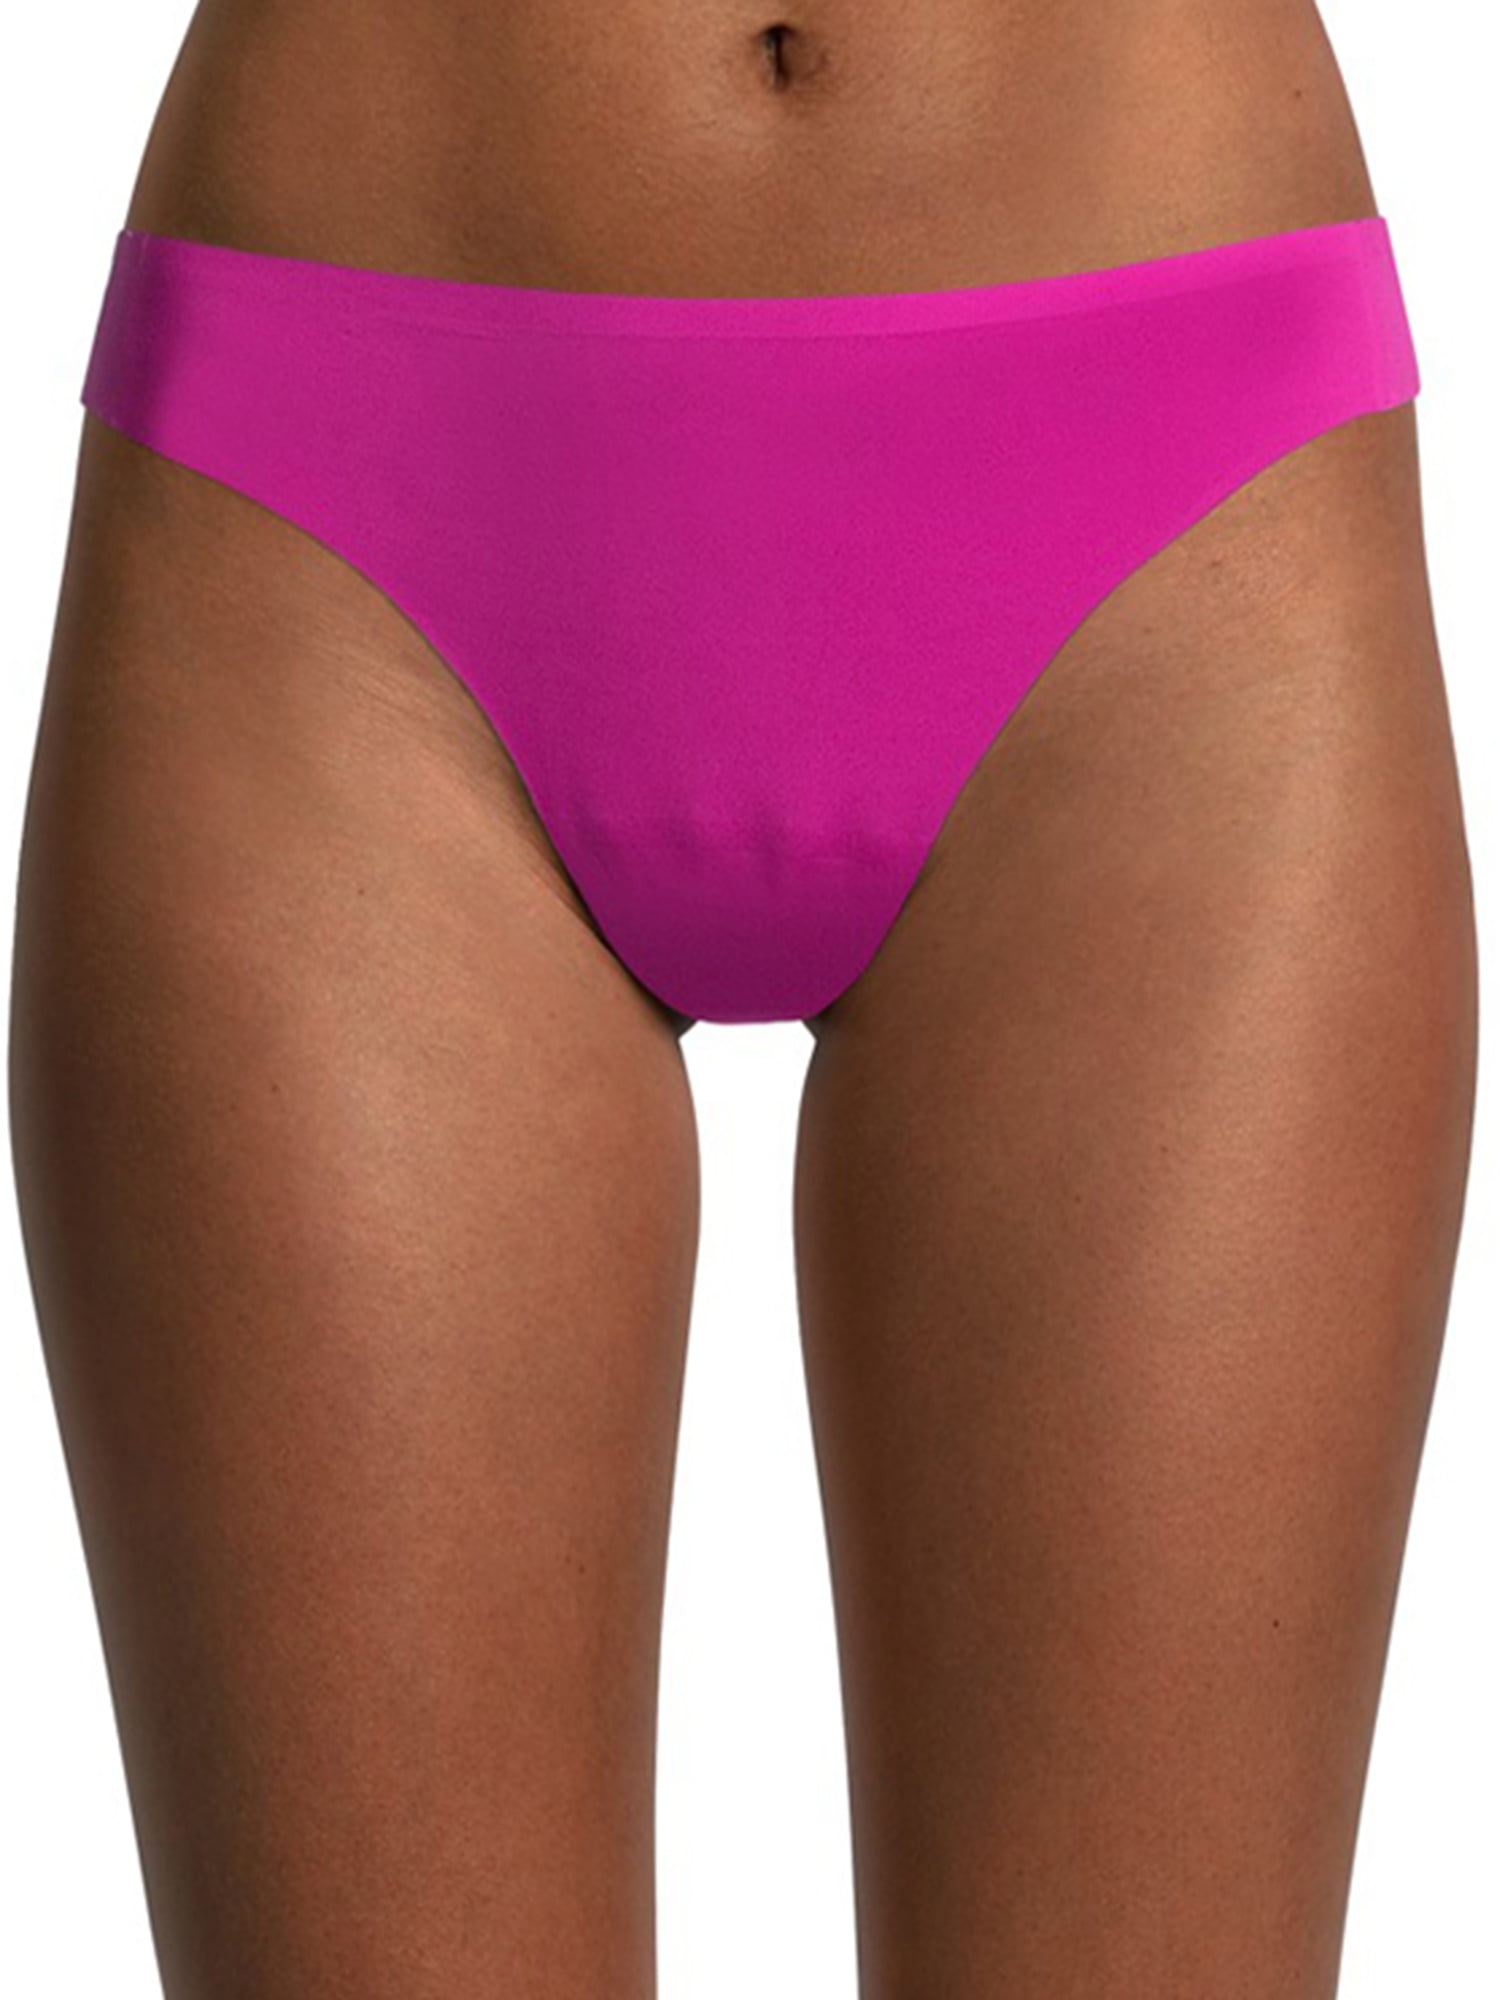 Womens Avia 3 Pack Laser Cut Thong Panties Size 3XL (22) for sale online